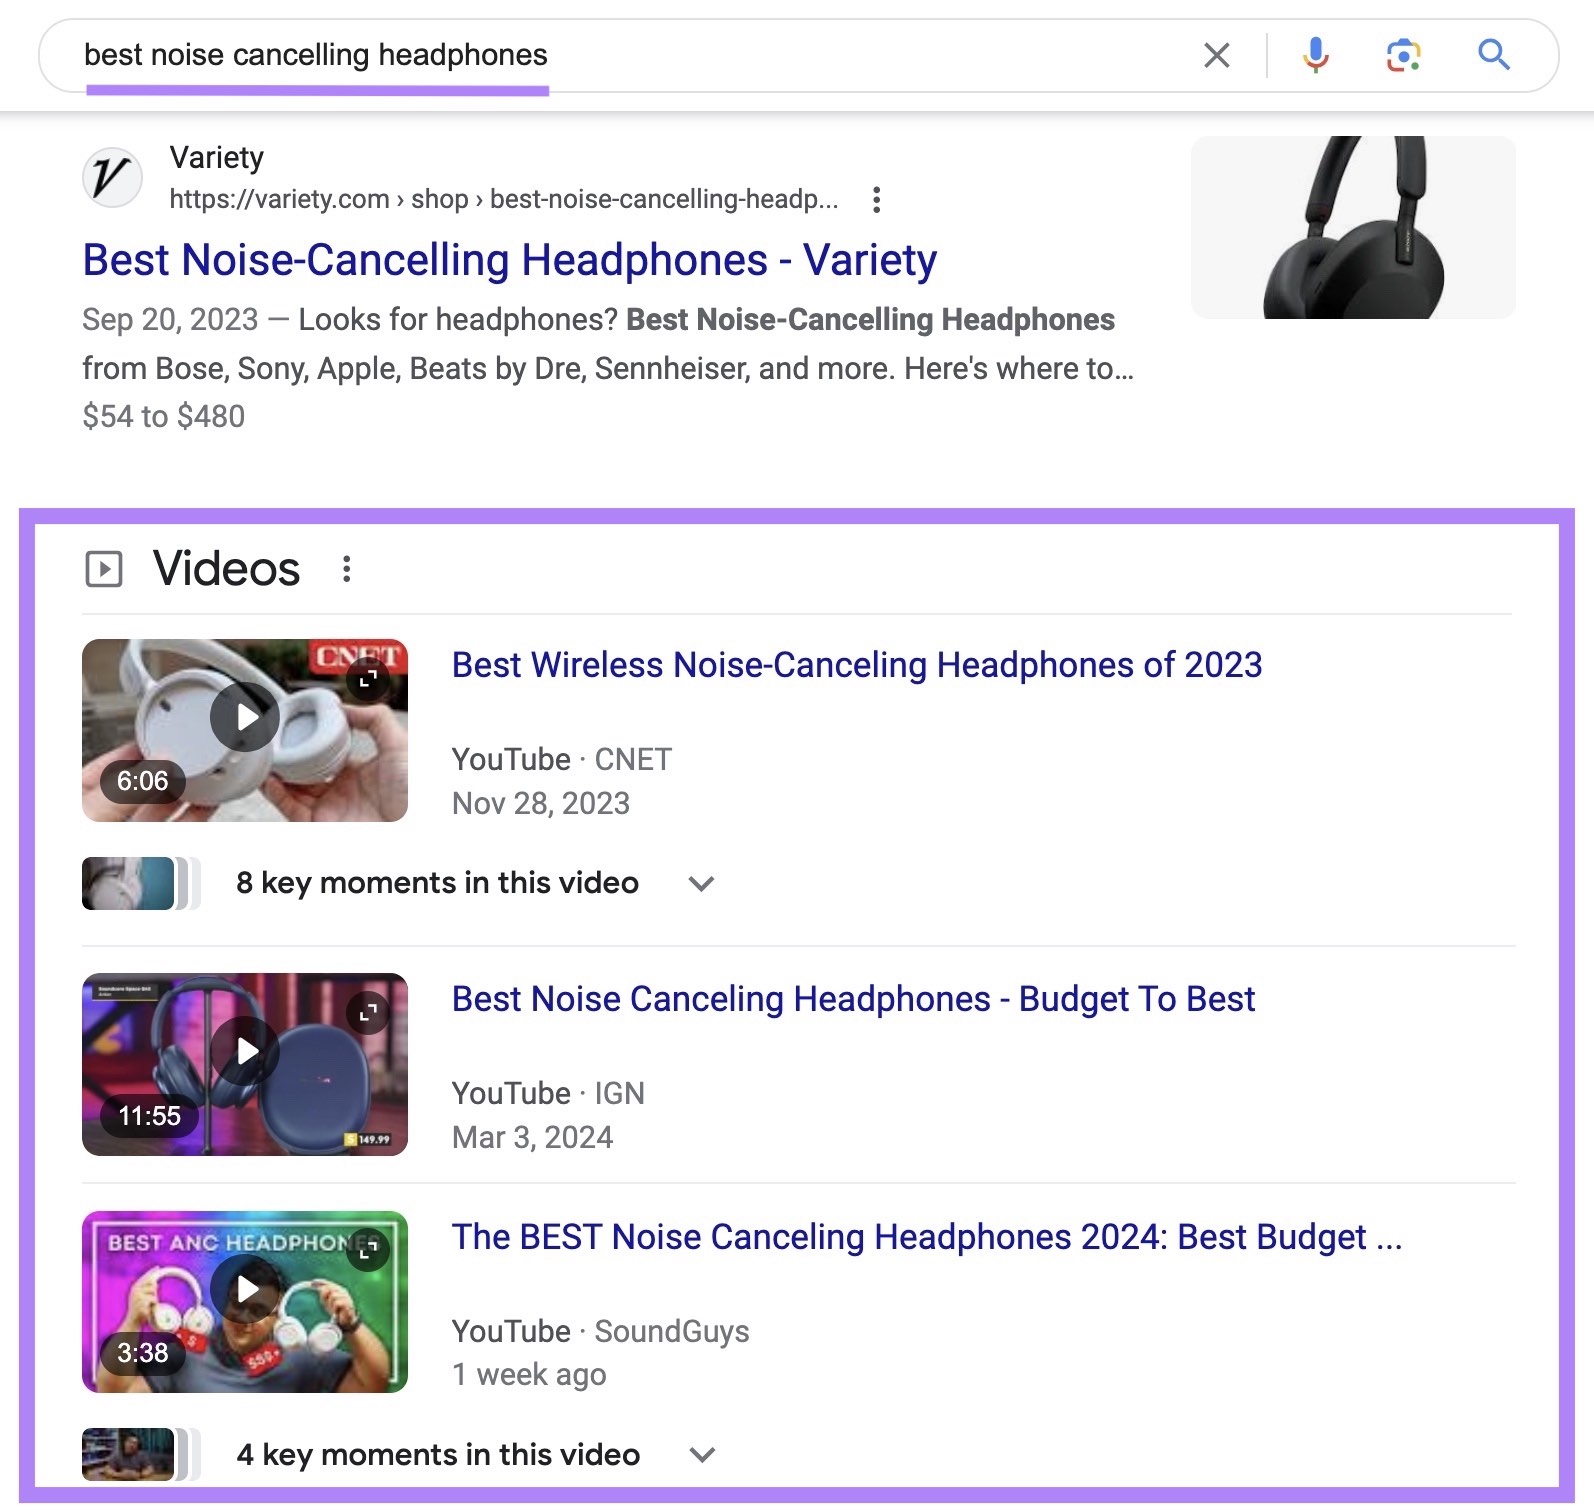 "Videos" section on Google SERP for the search term 'best noise cancelling headphones'.